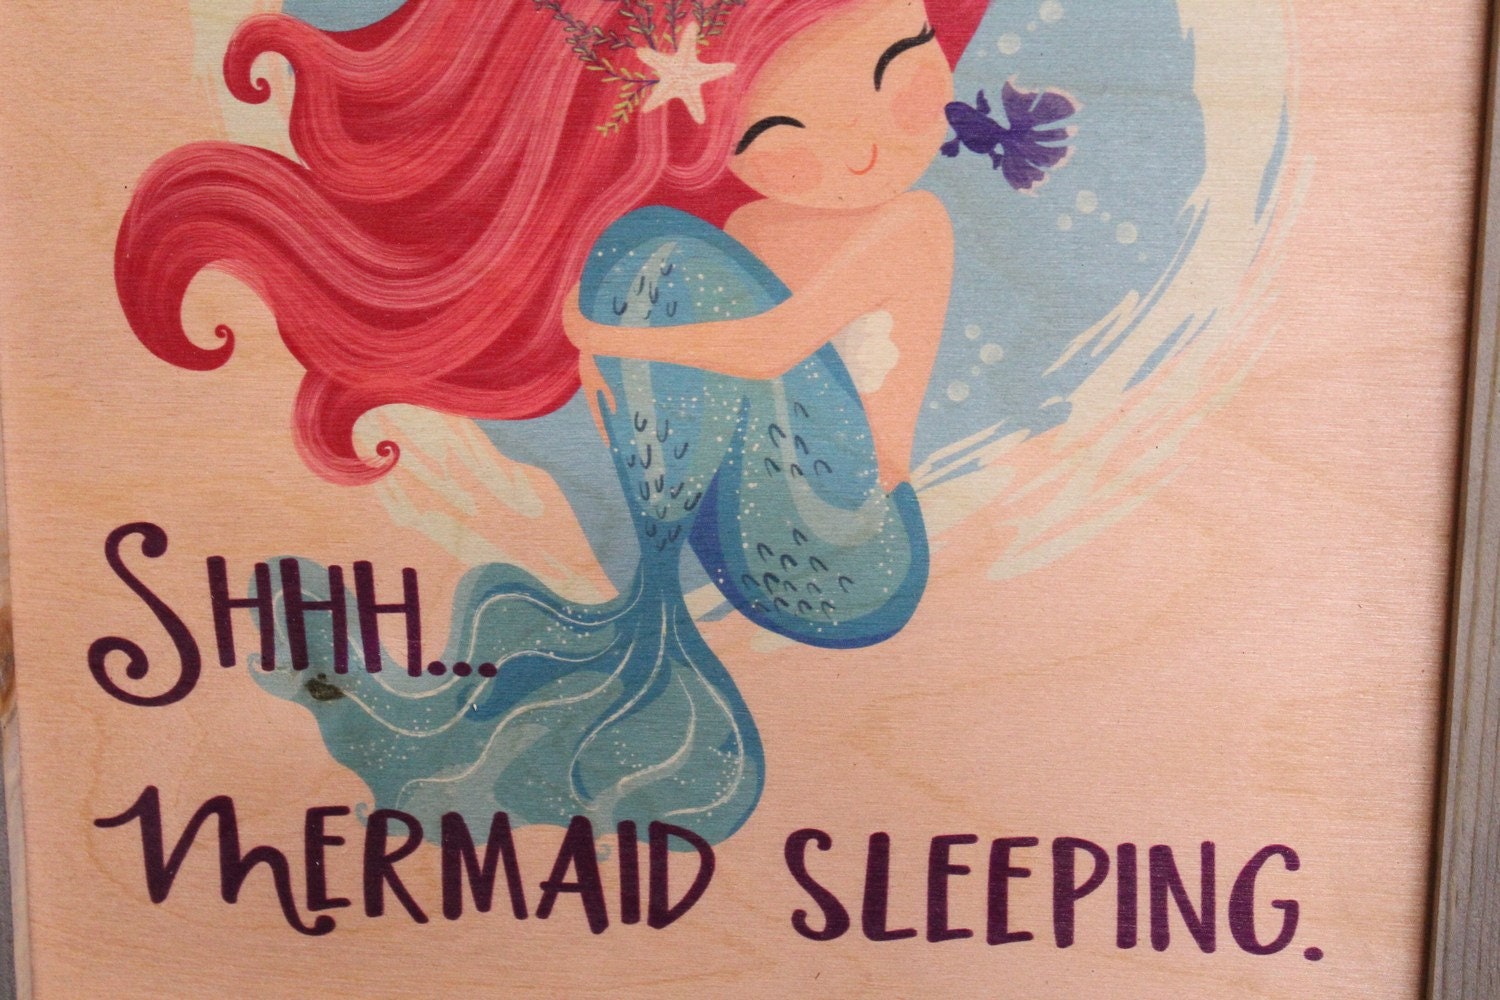 Shhh Mermaid Sleeping Wood Sign Gray Frame Under the Water Wall Art Primitive Rustic Decoration Décor Little Girl Do Not Disturb Room Sign